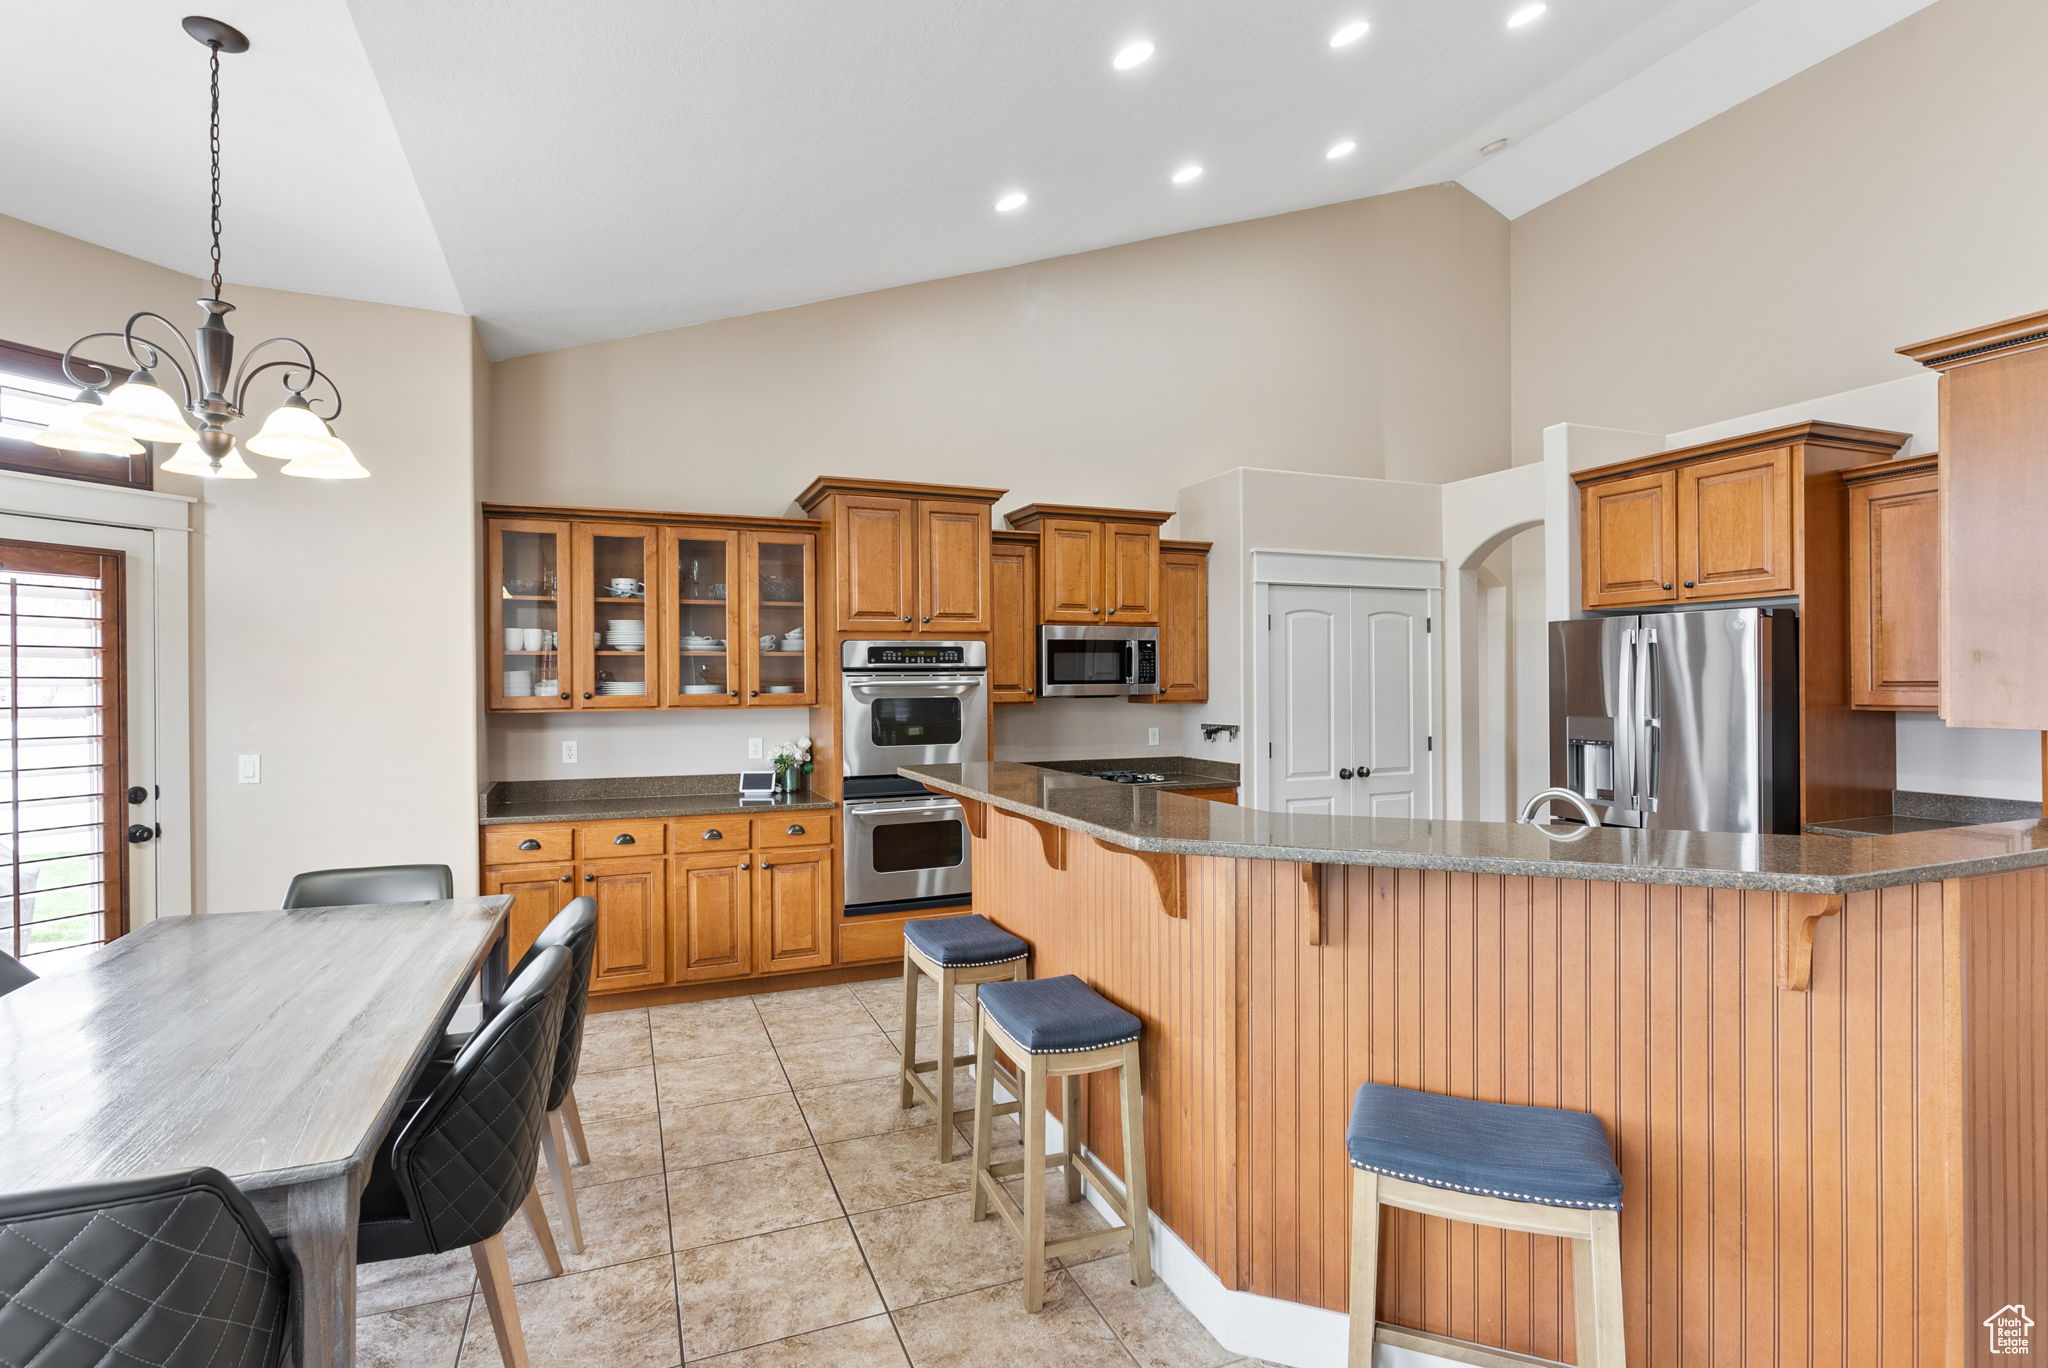 Kitchen featuring an inviting chandelier, a breakfast bar area, light tile floors, stainless steel appliances, and pendant lighting